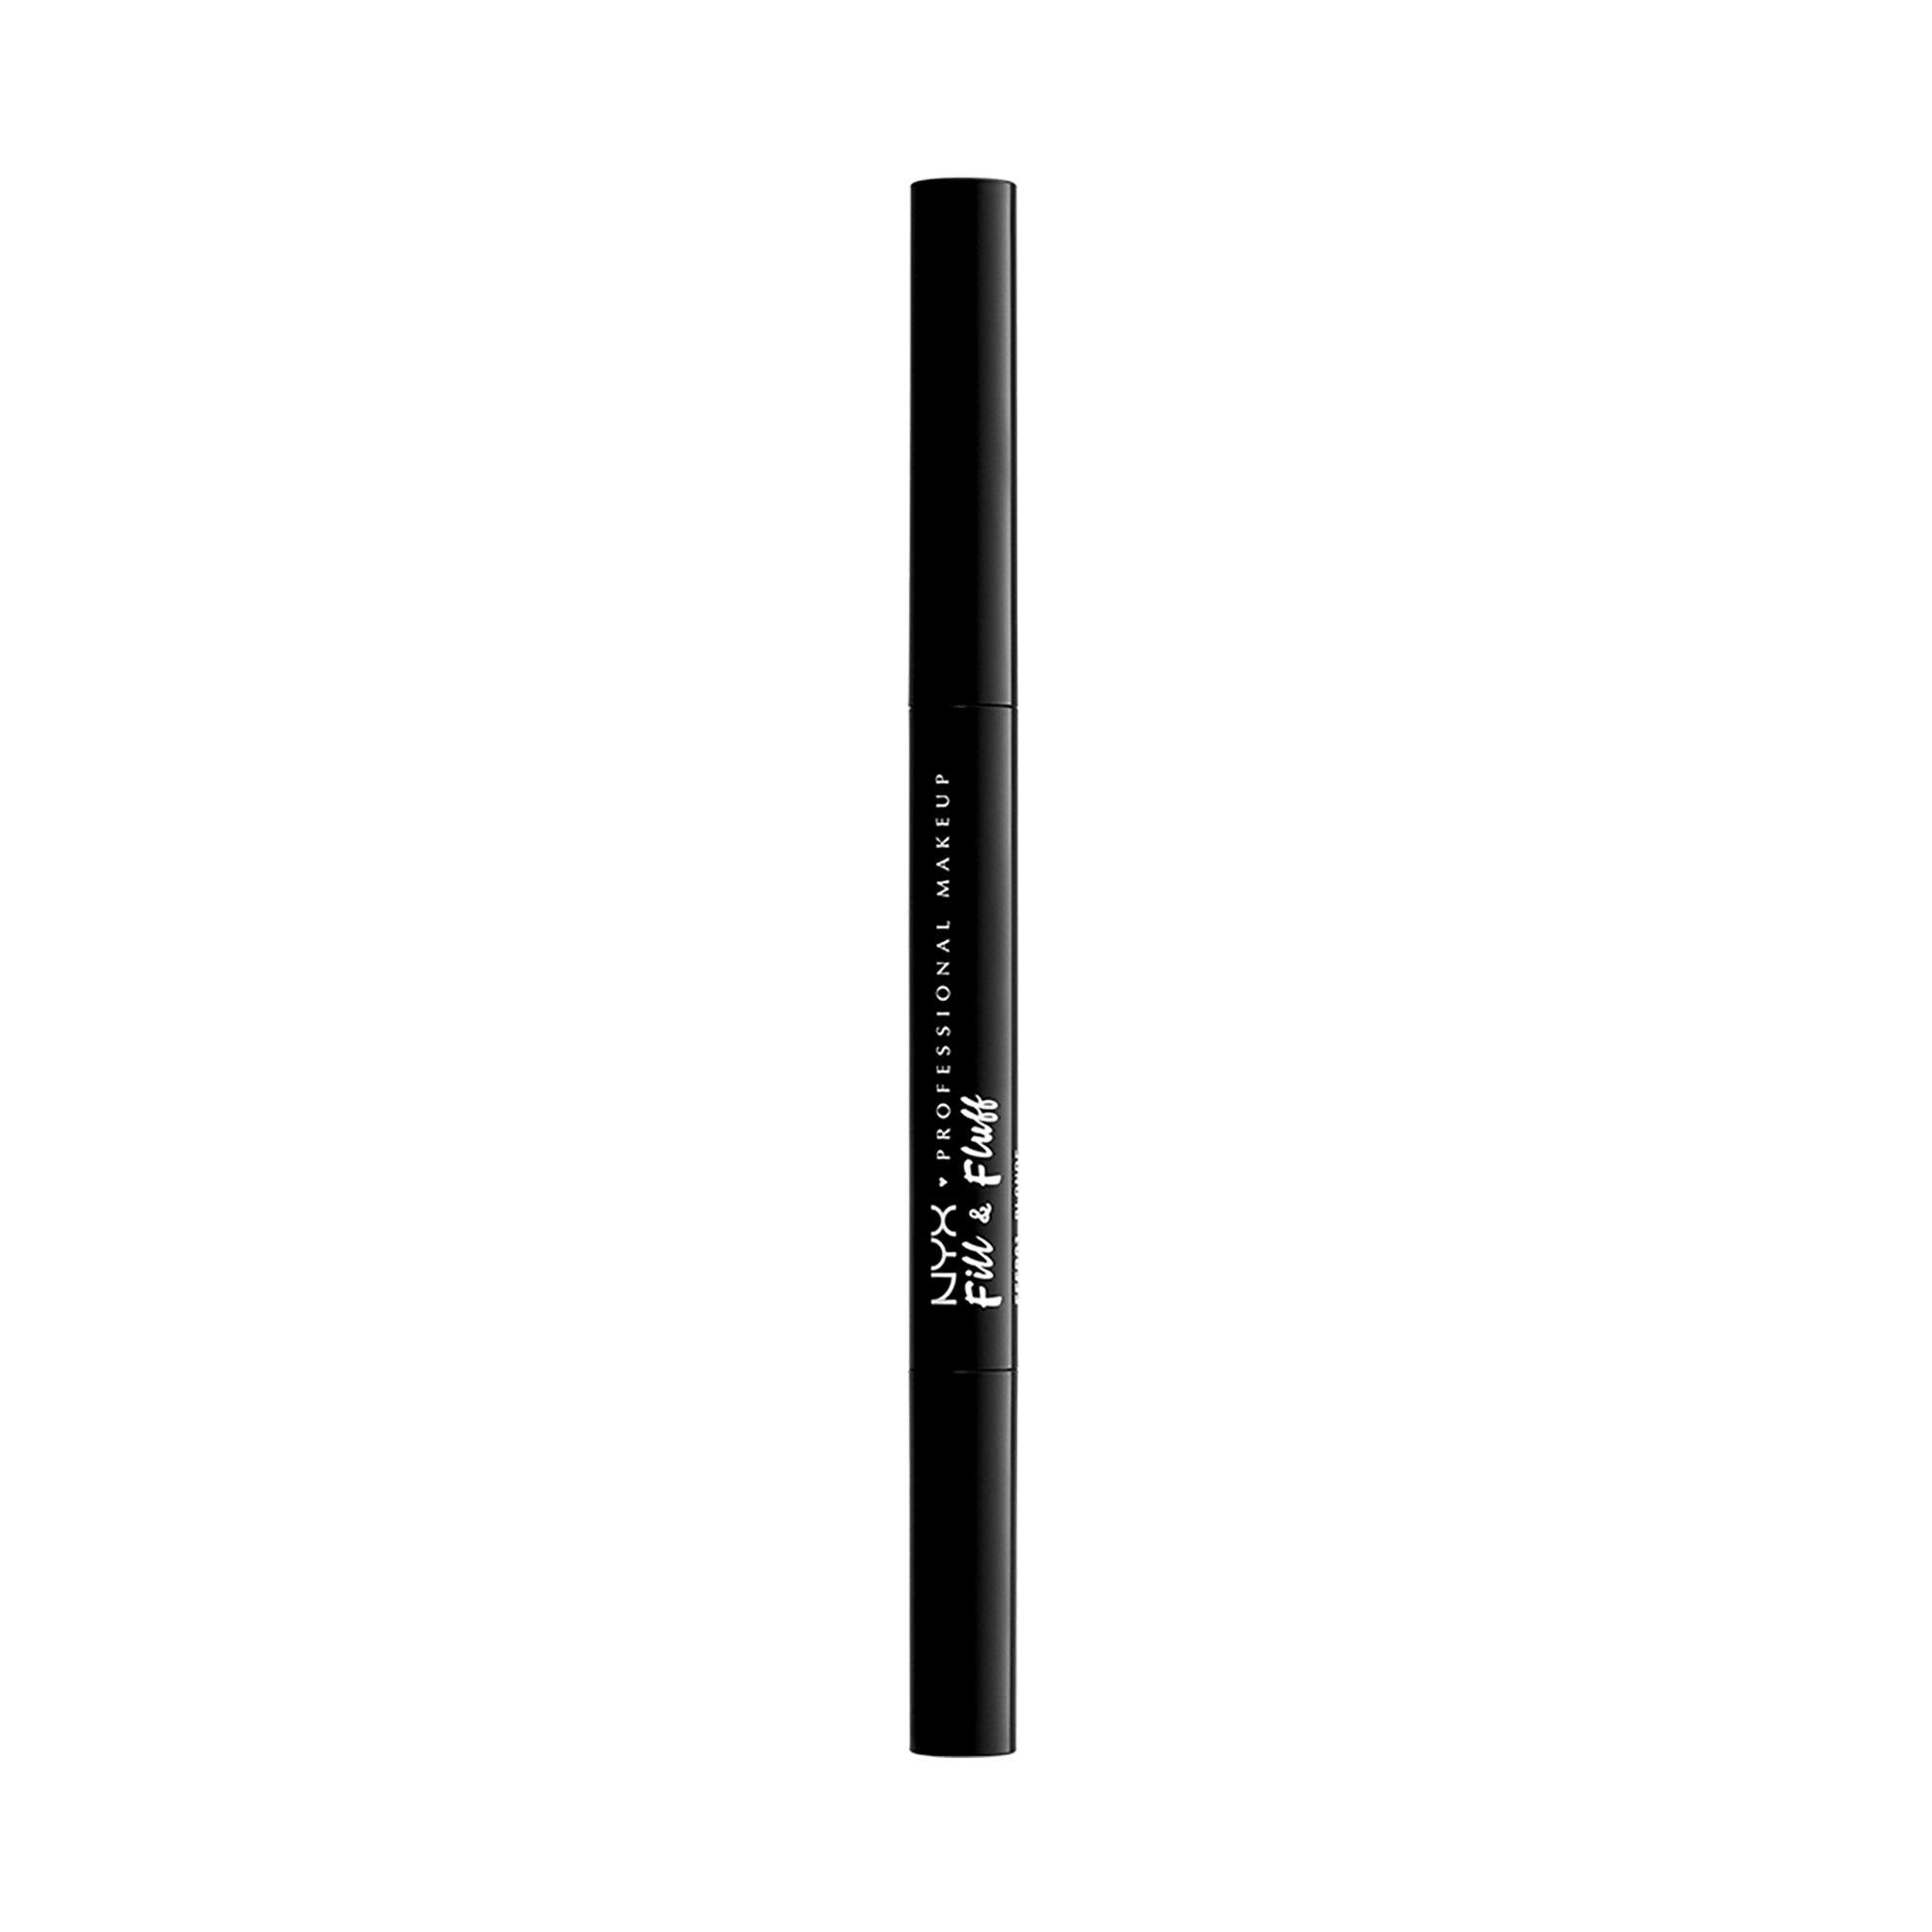 Image of NYX-PROFESSIONAL-MAKEUP Fill & Fluff Eyebrow Pomade Pencil - 0.2g